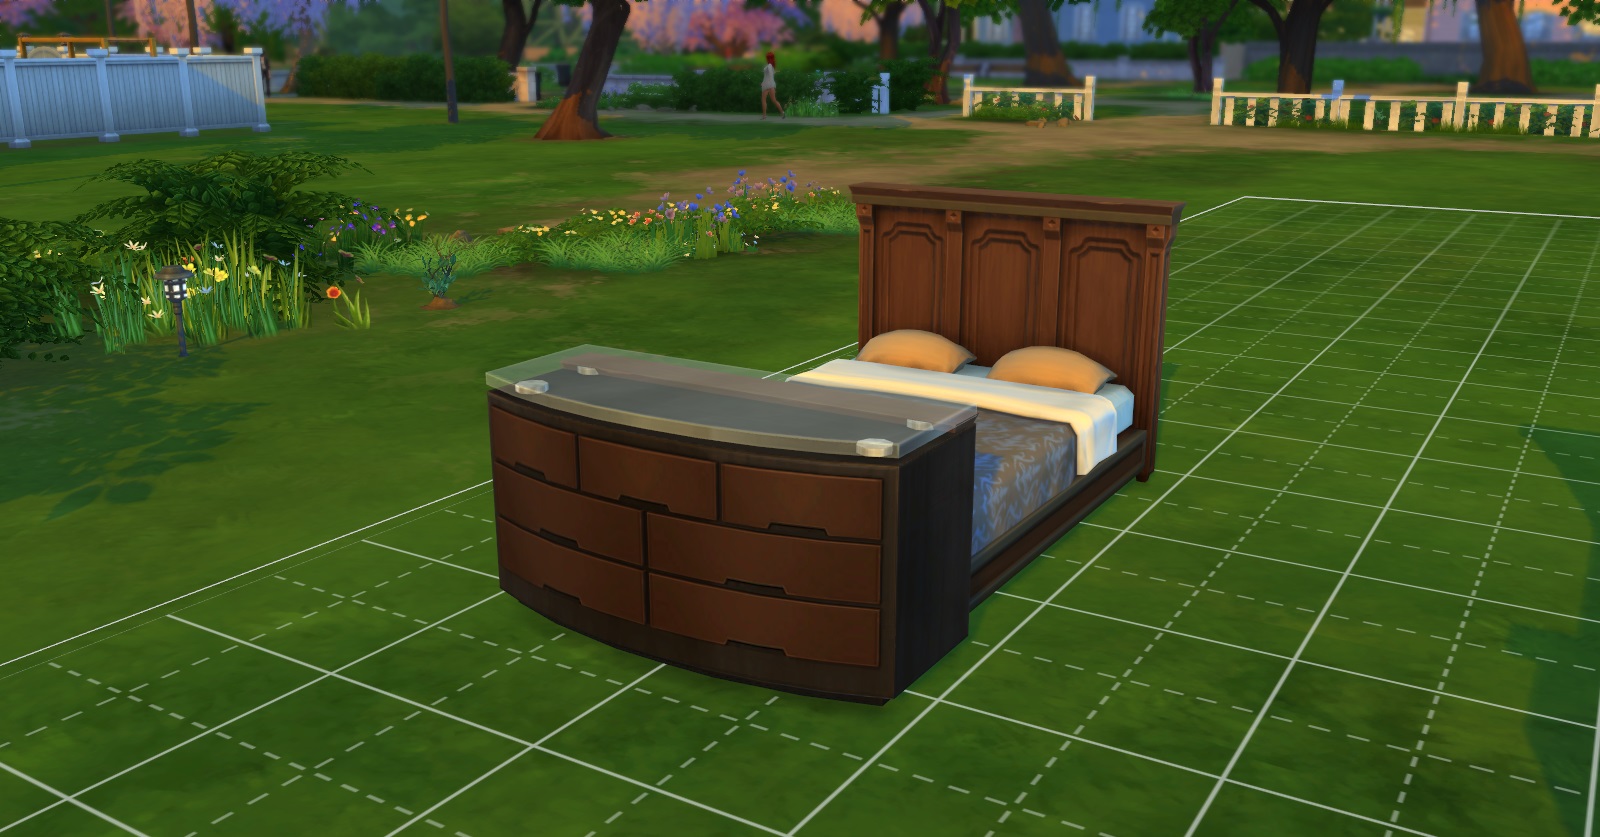 Симс 4 bb moveobjects. MOVEOBJECTS SIMS 4. MOVEOBJECTS on для симс. SIMS 4 MOVEOBJECTS on. MOVEOBJECTS on для симс 4.